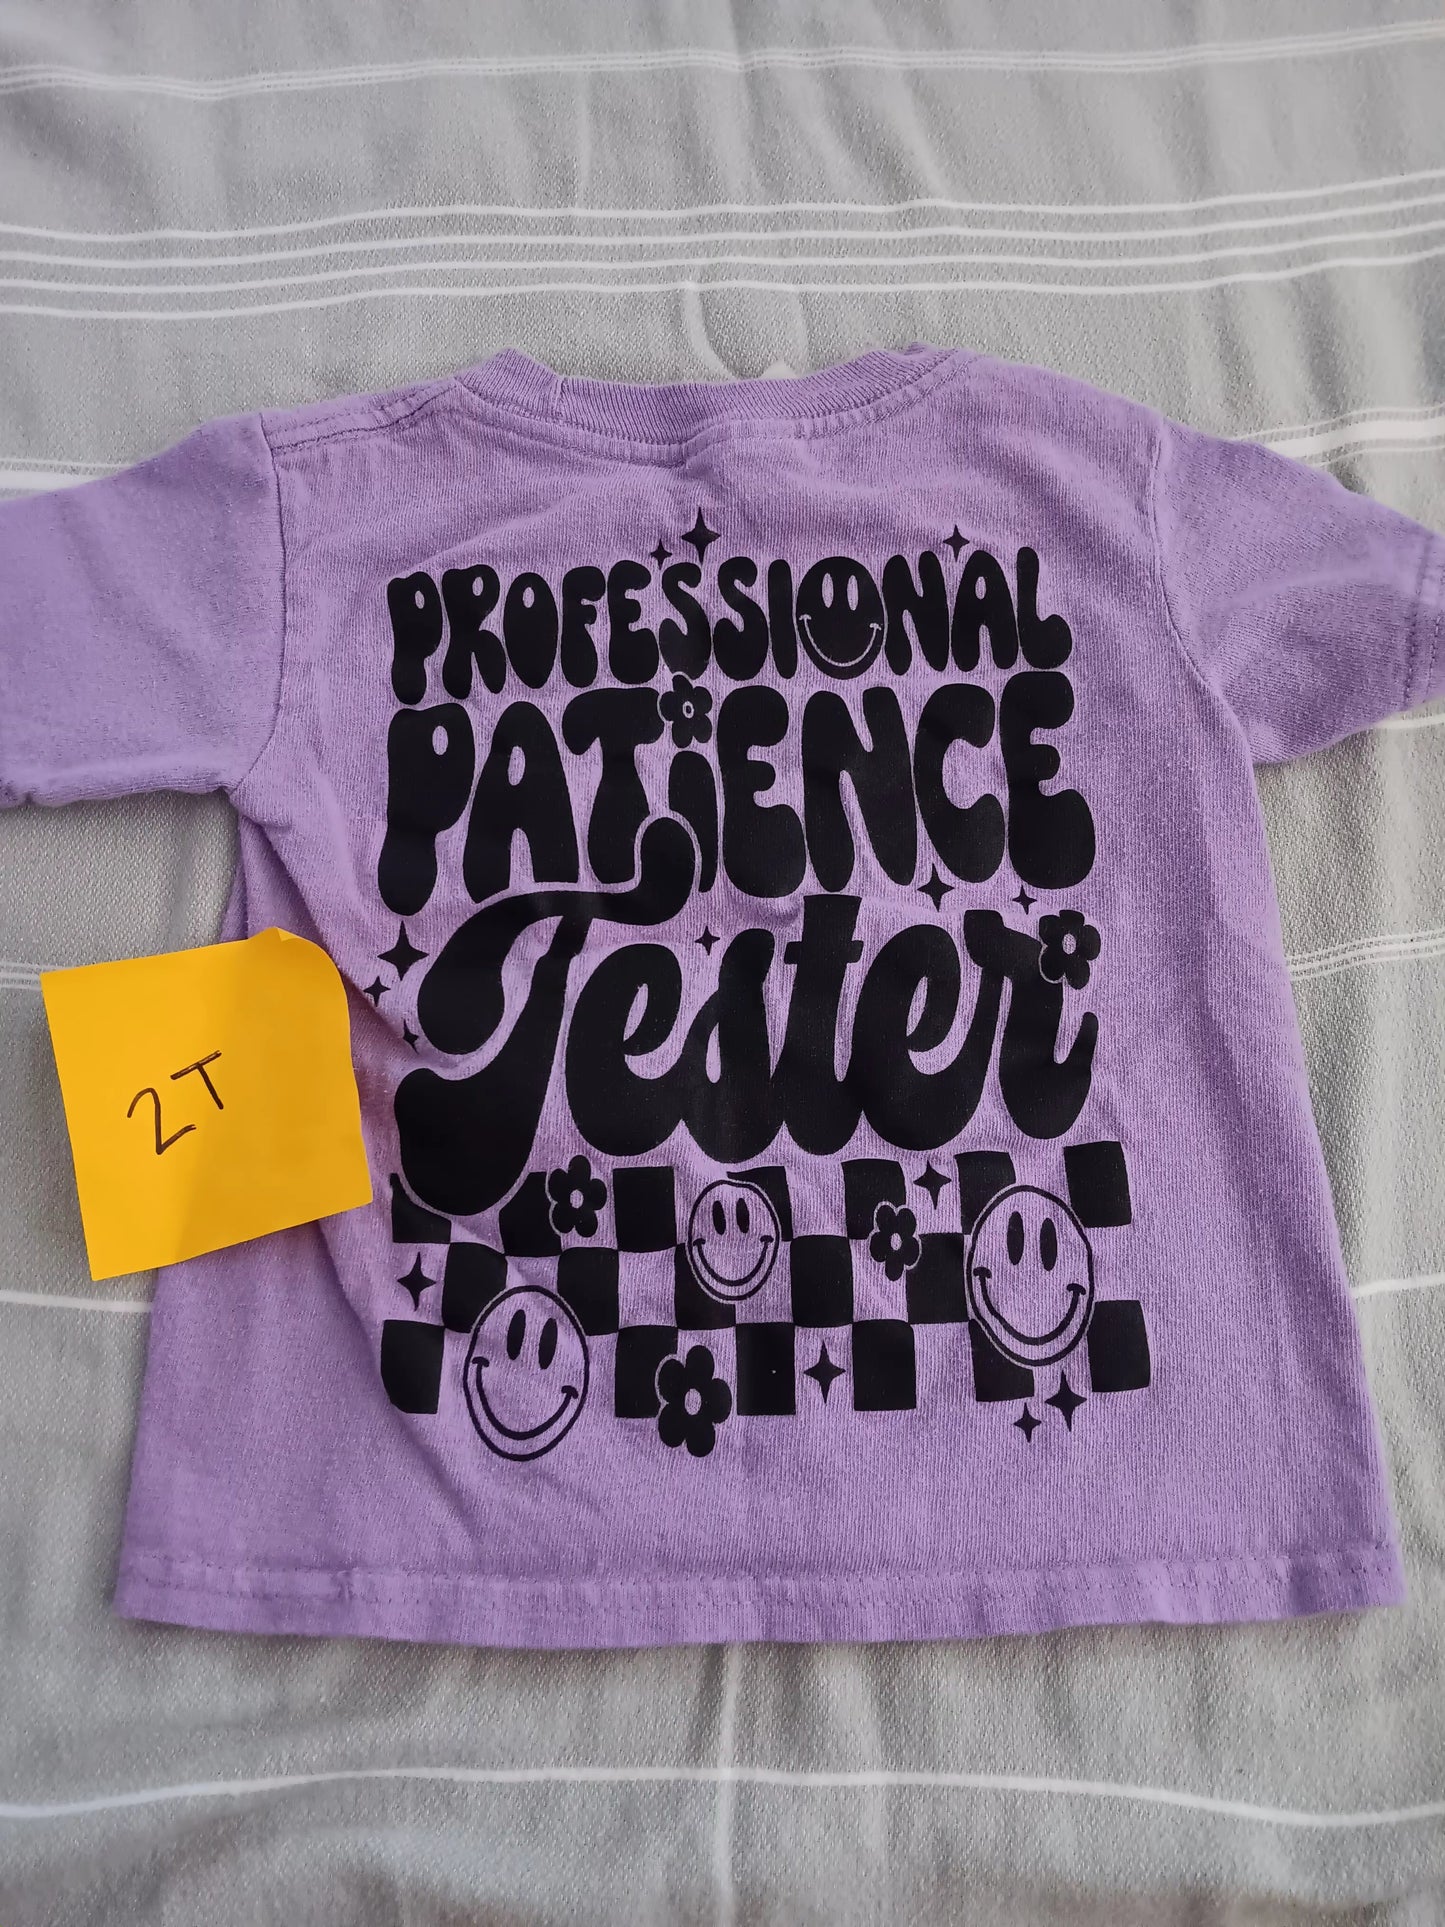 Patience tester t-shirt